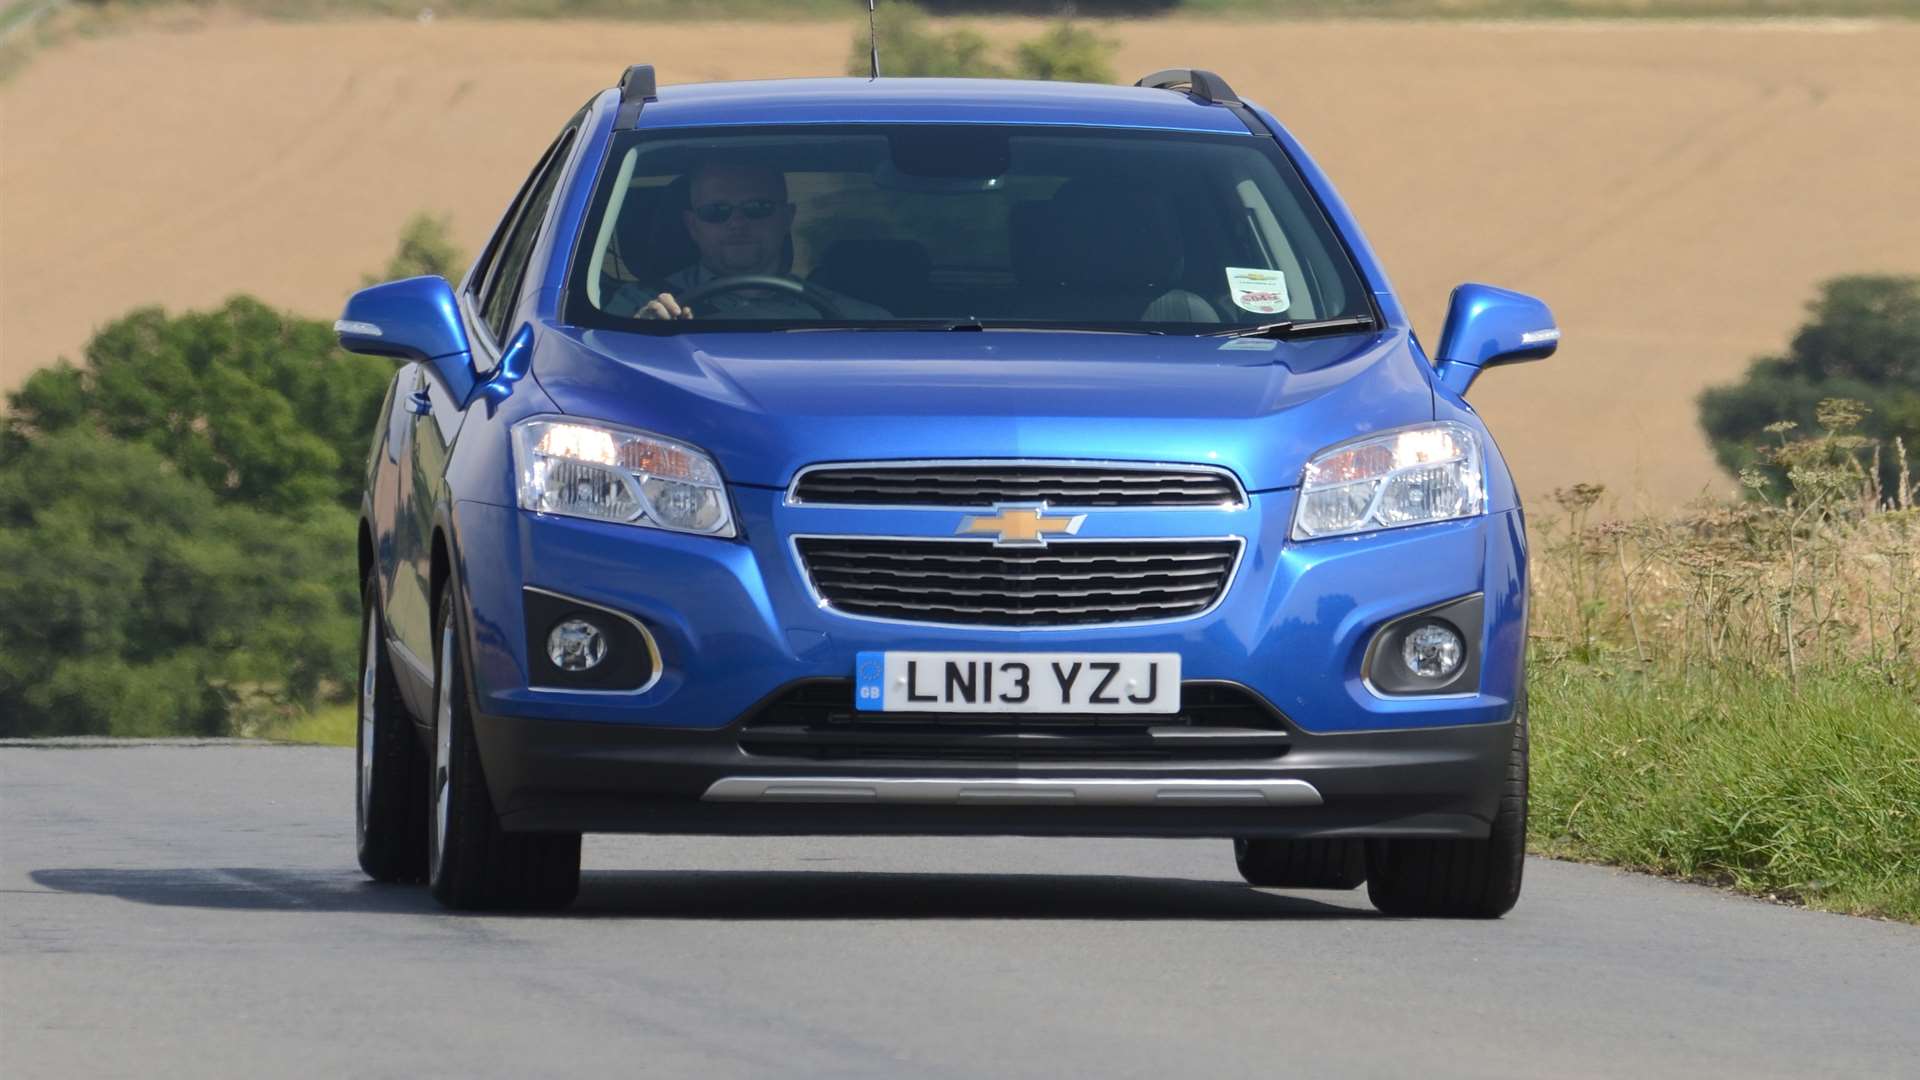 Chevrolet sales helped Hidsons kick start sales last year before the dealership pulled the brand